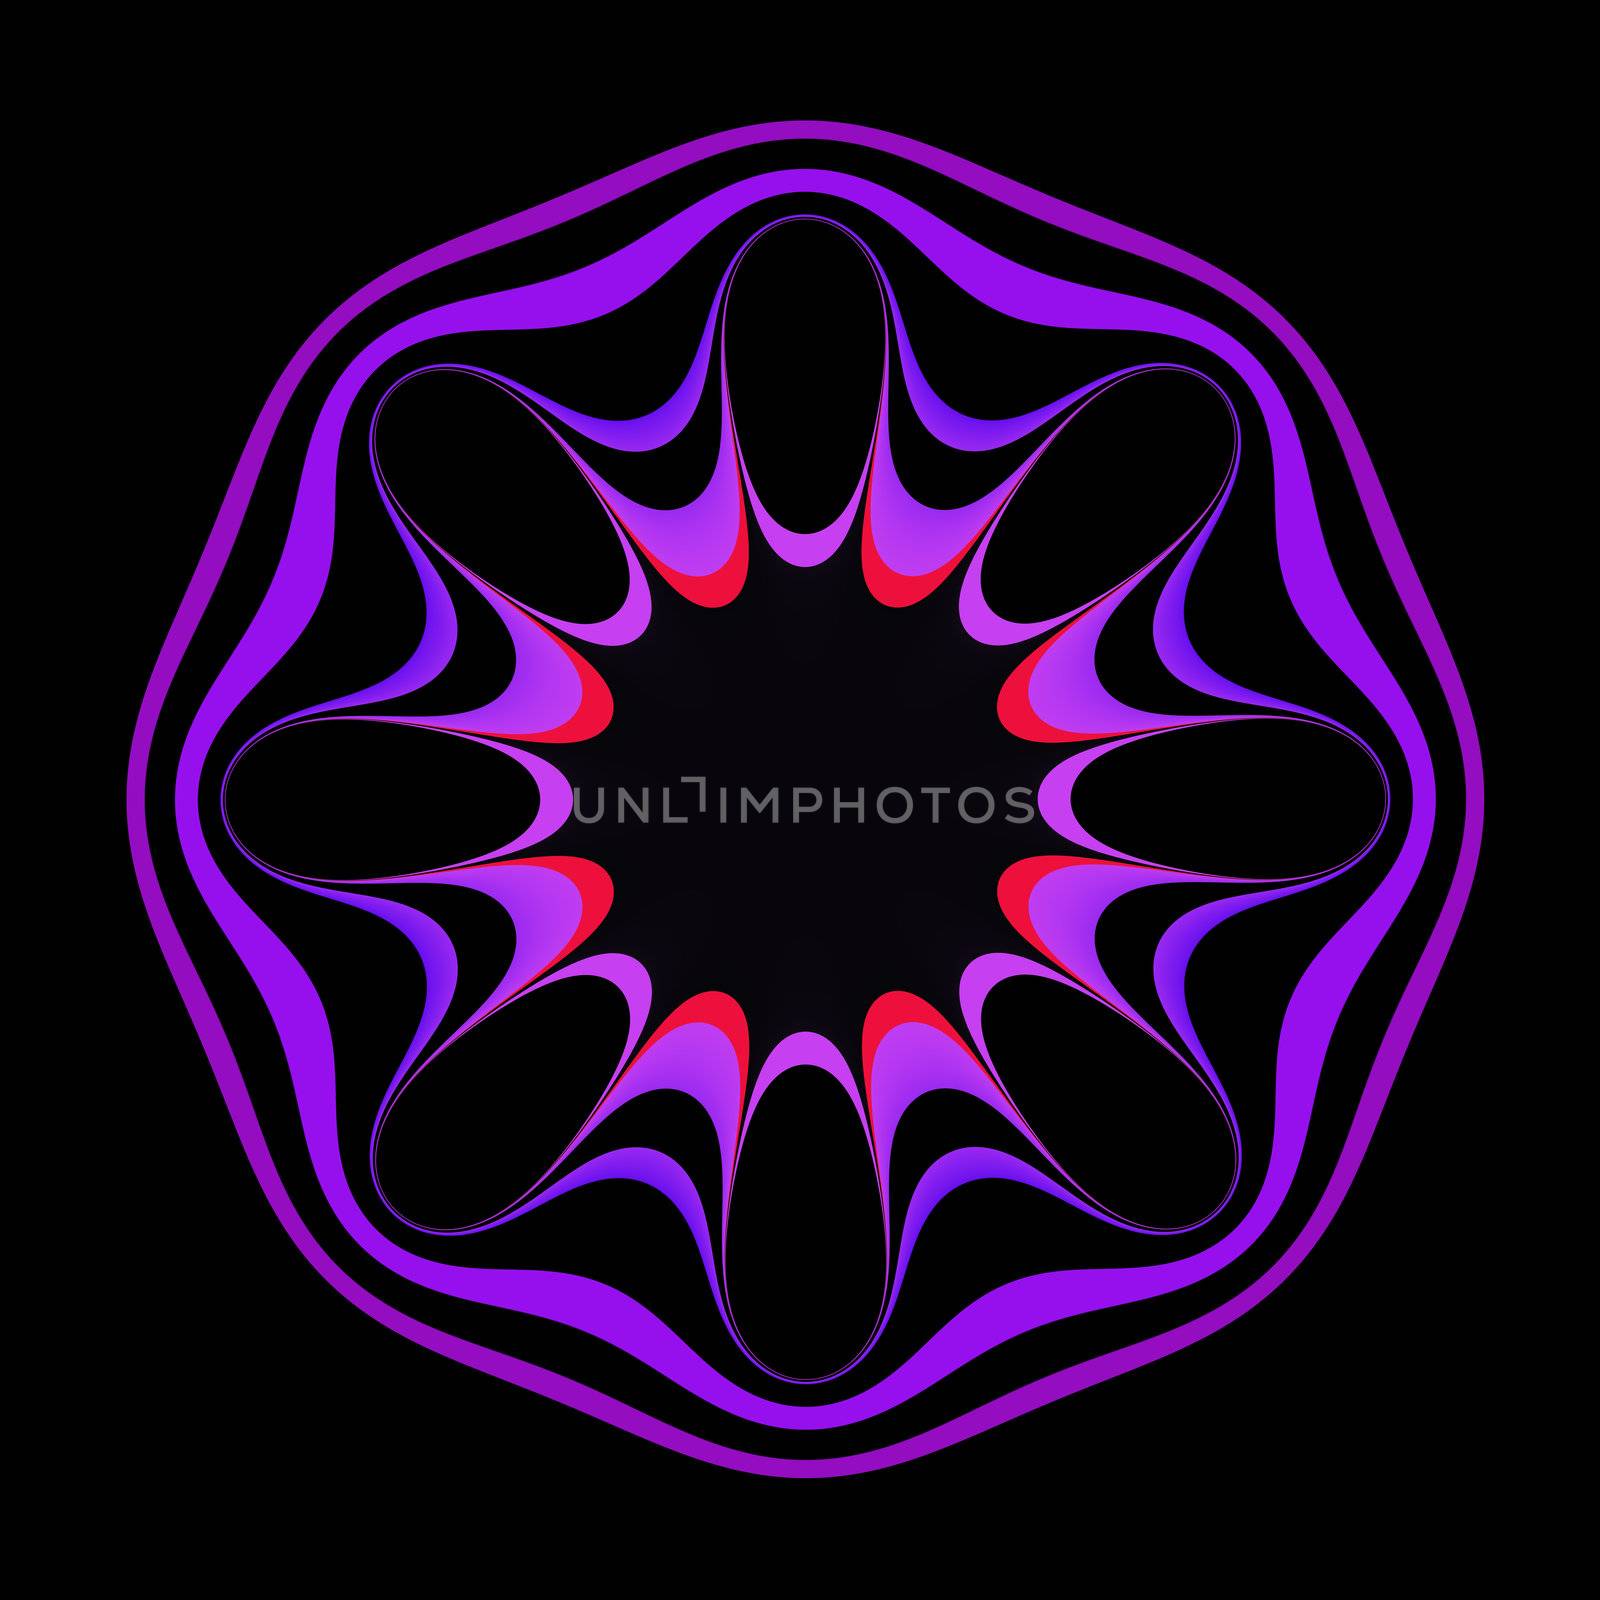 An abstract mandala shaped fractal done in shades of orange, blue, and purple floating on a black background.